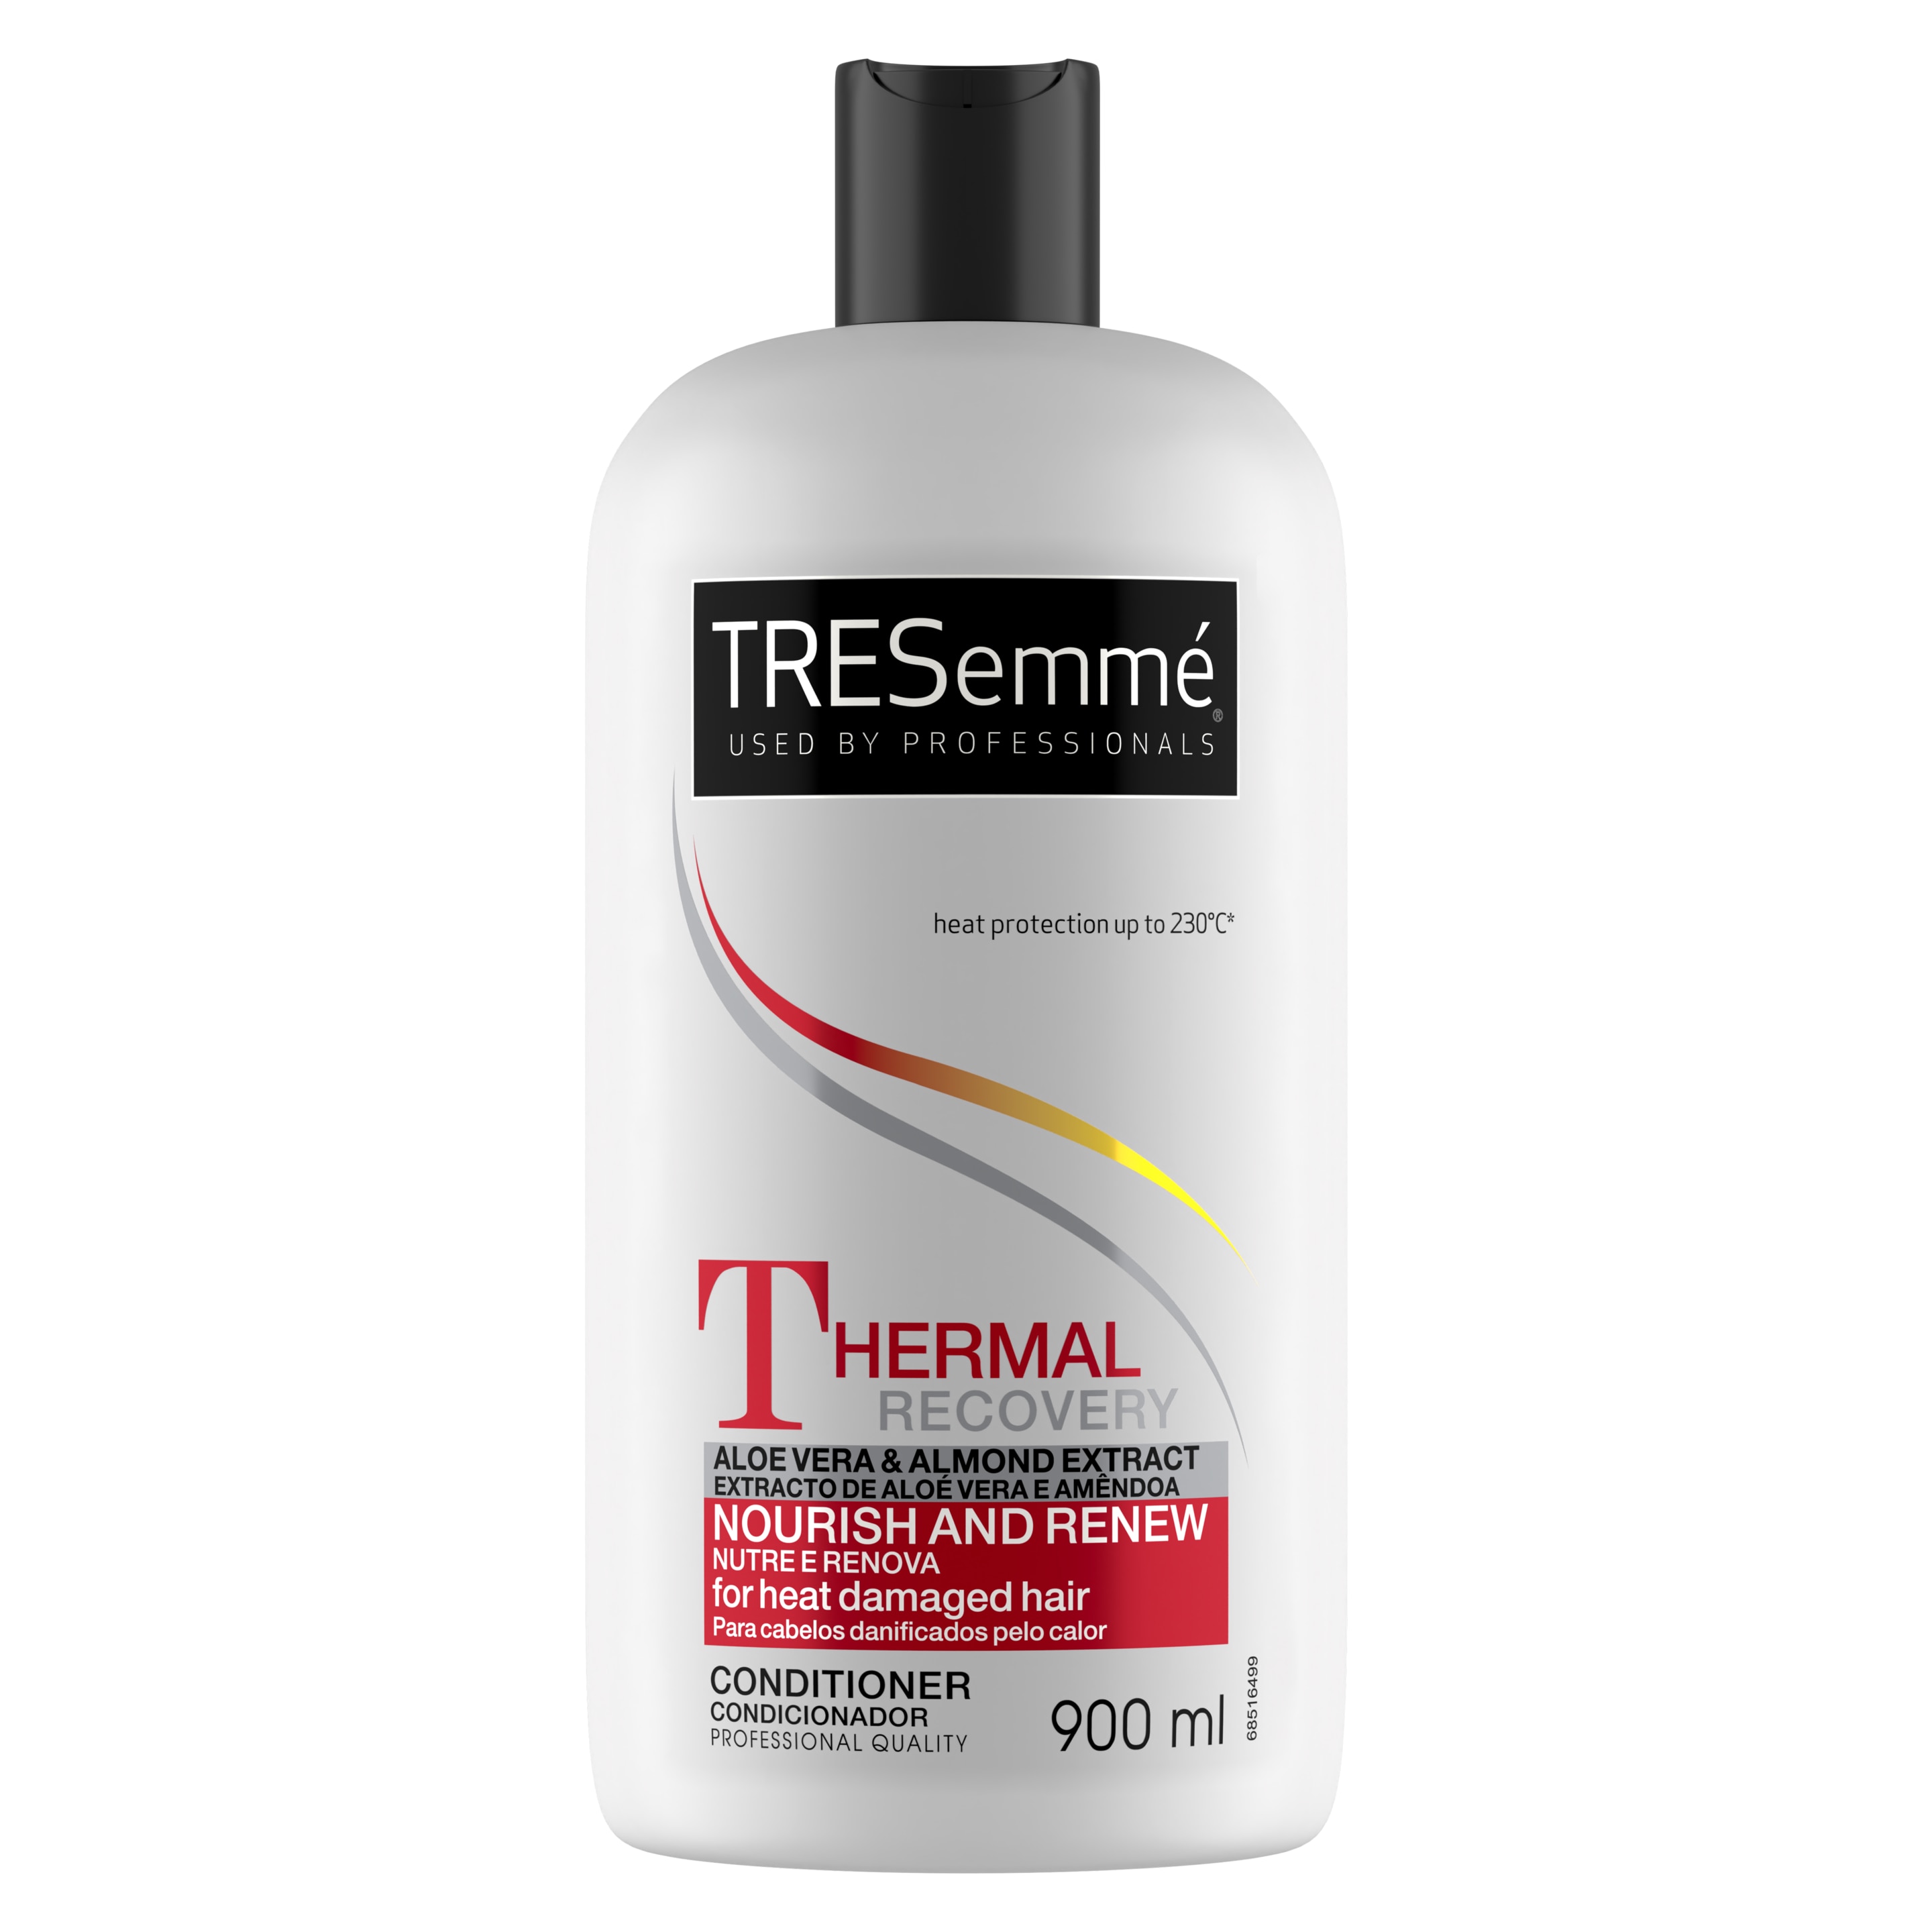 TRESemmé Thermal Recovery Conditioner 900ml Front of pack image